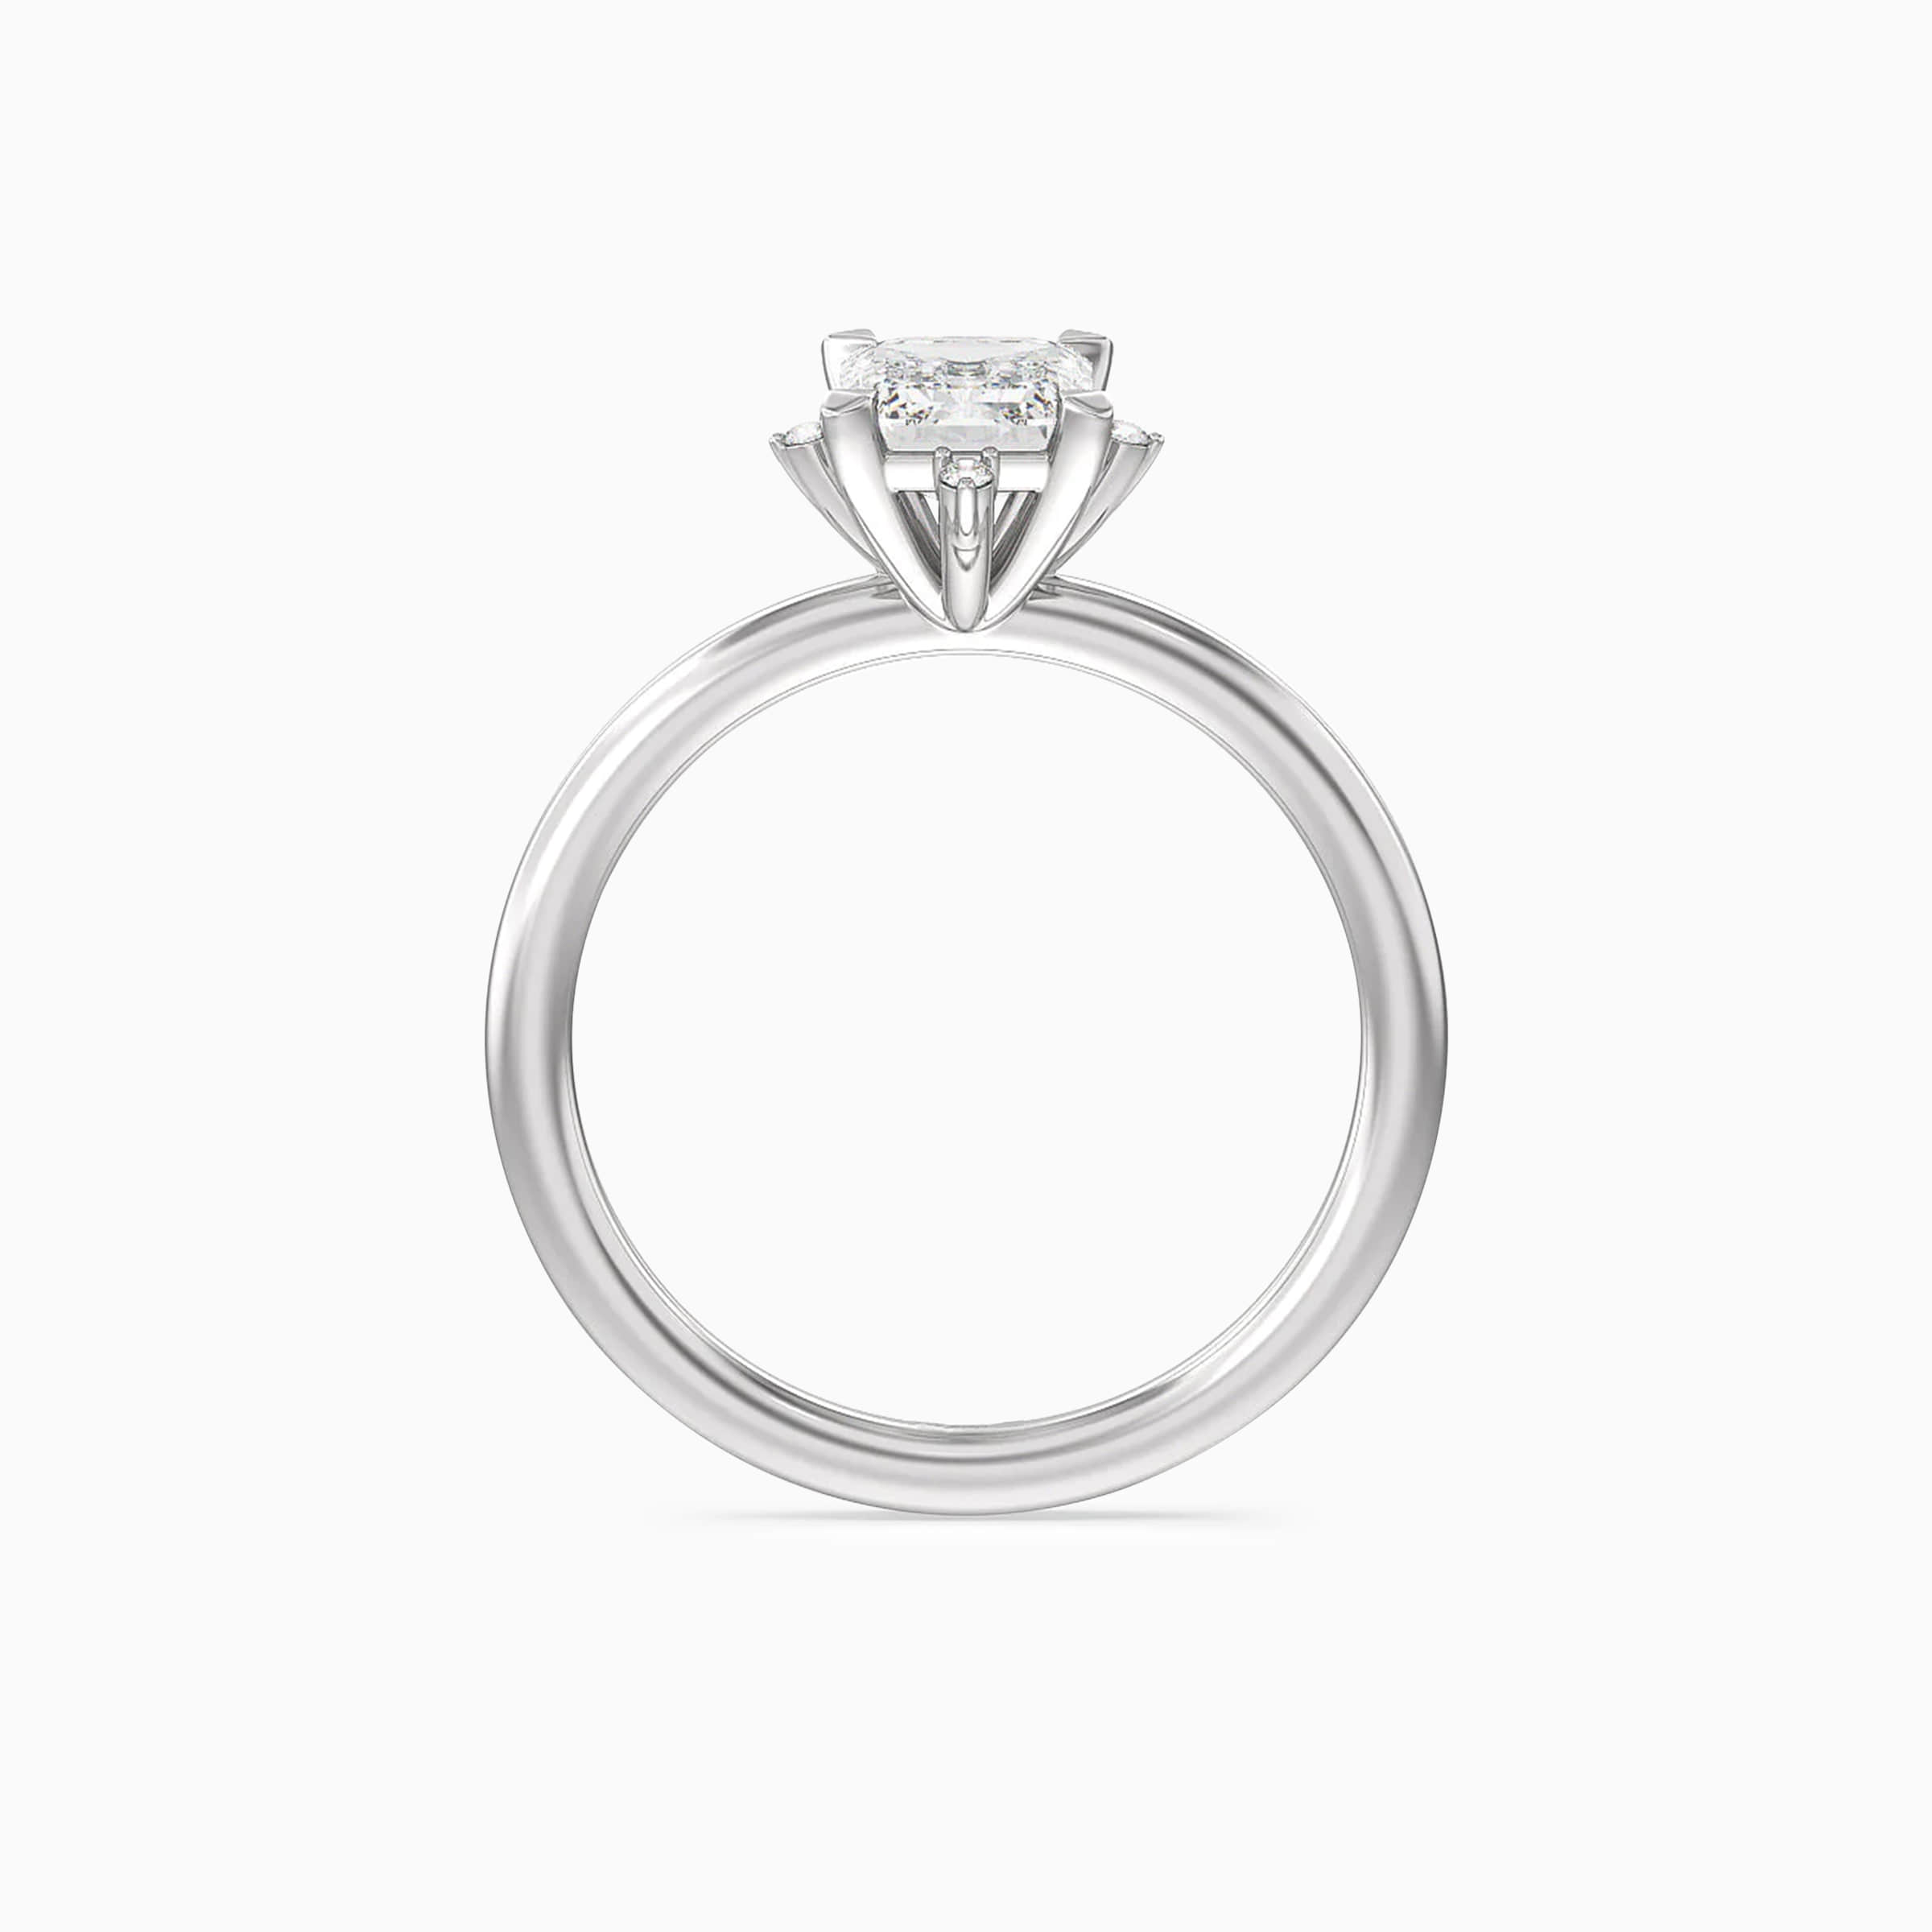 Darry Ring classic emerald cut engagement ring front view